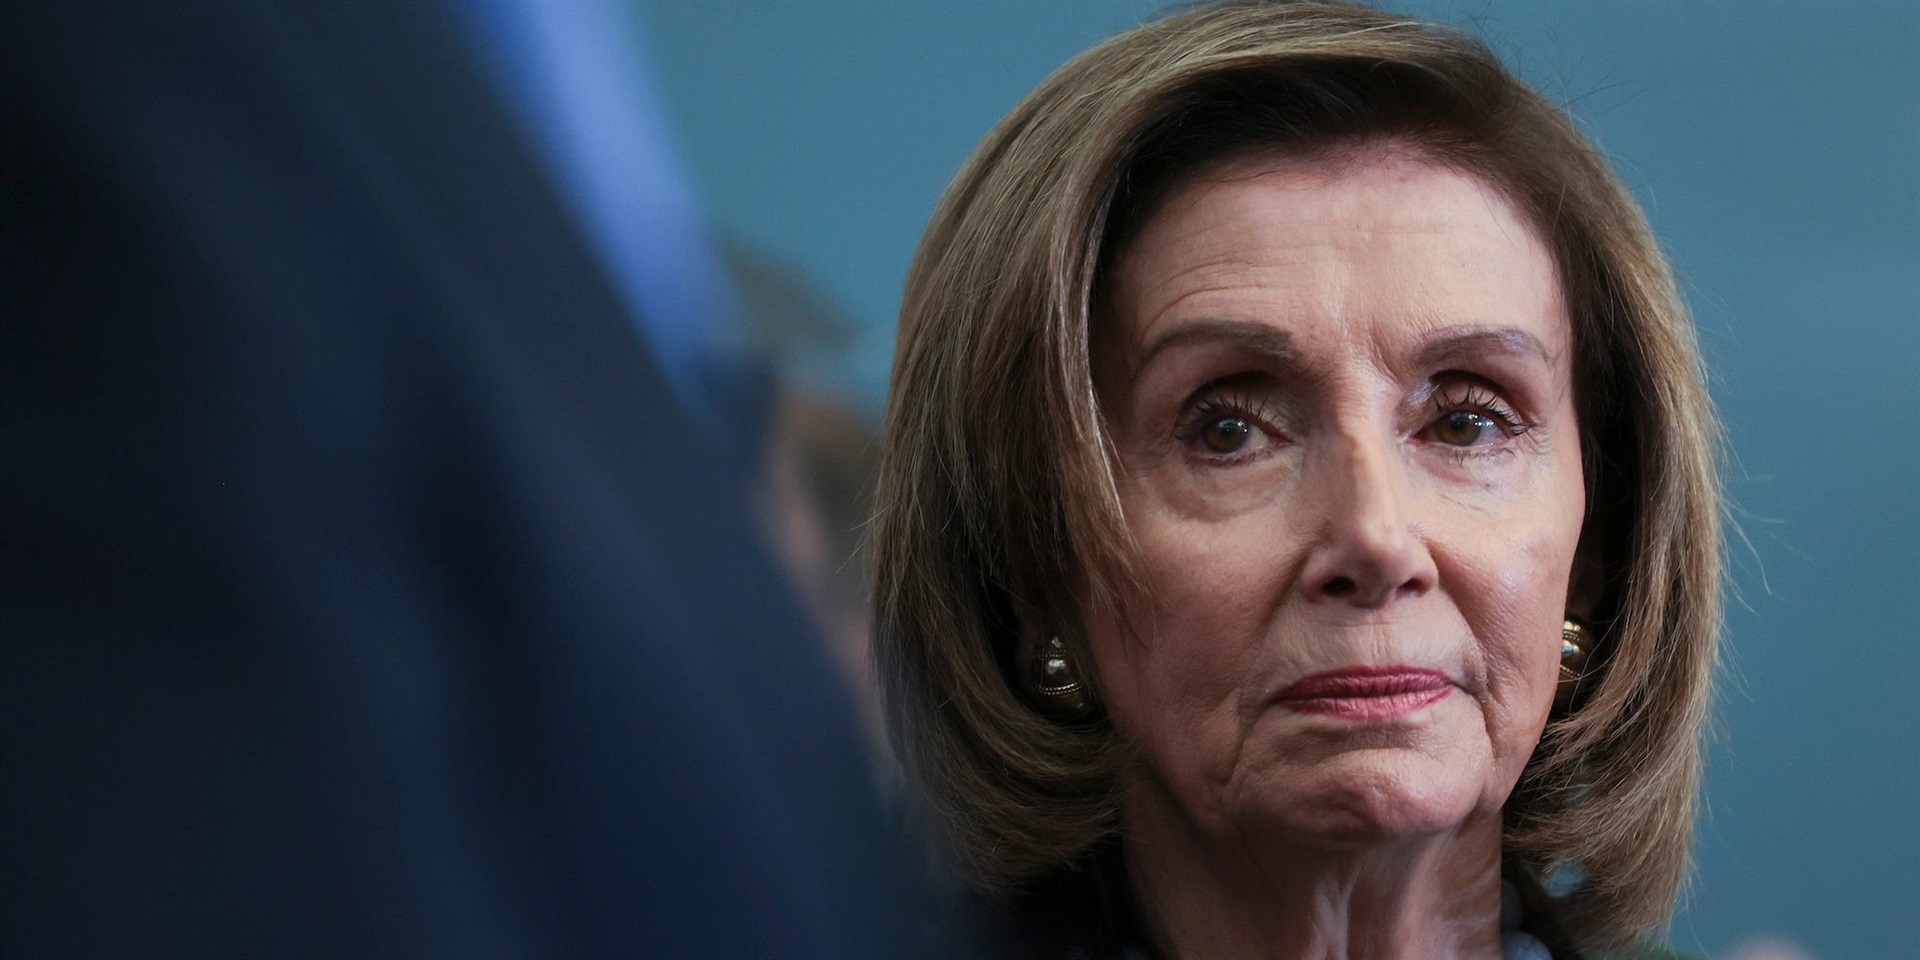 House Speaker Nancy Pelosi attends her weekly news conference at the US Capitol on February 23, 2022 in Washington, DC. Win McNamee/Getty Images